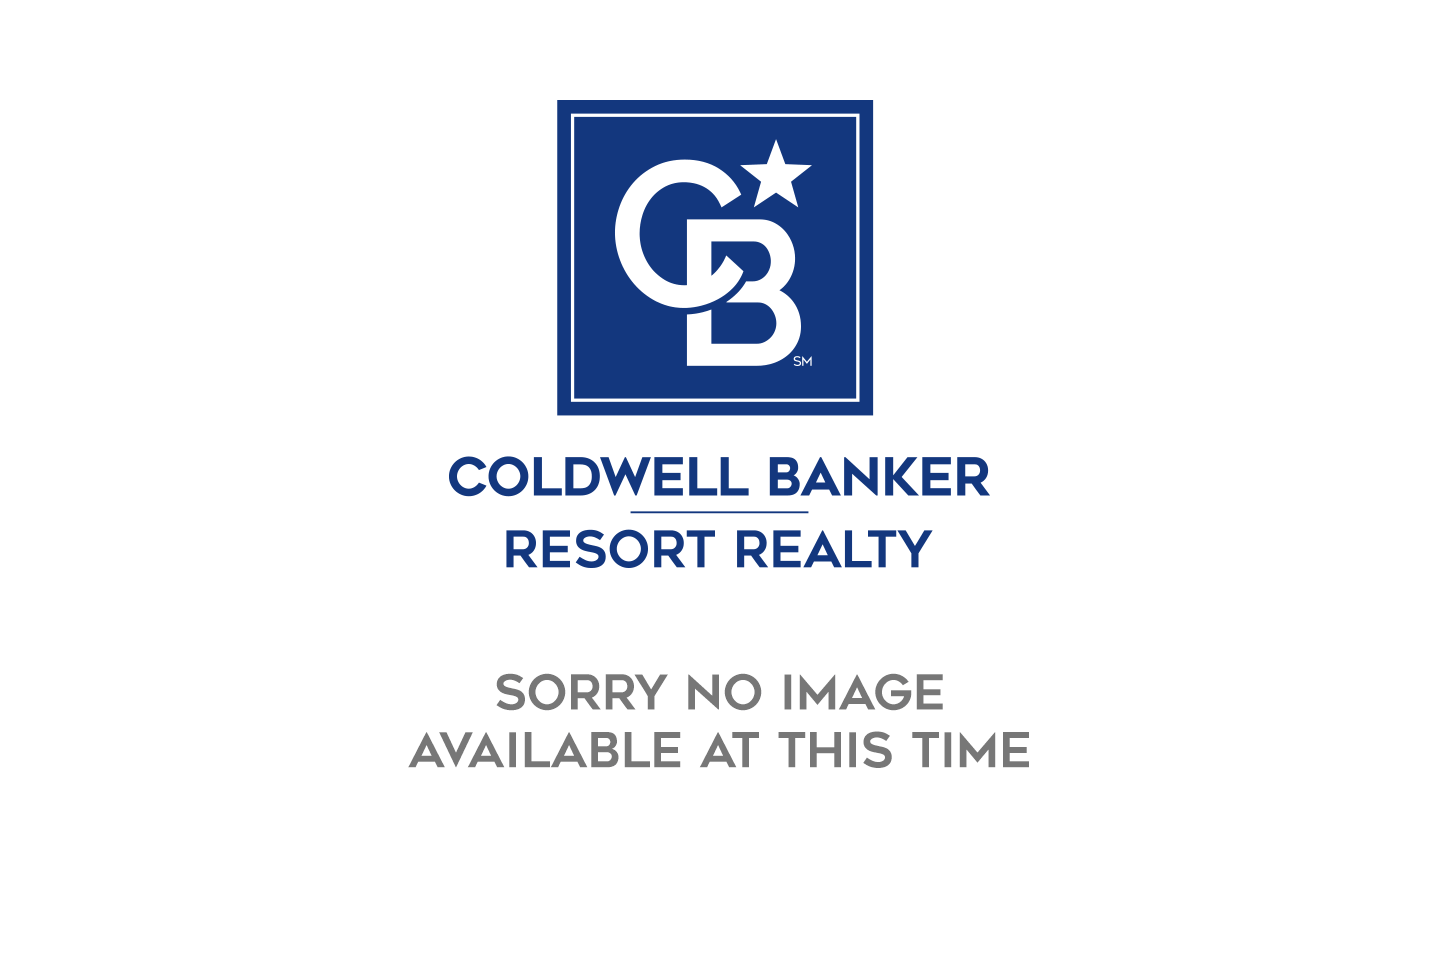 noimage Lincoln - Coldwell Banker Resort Realty